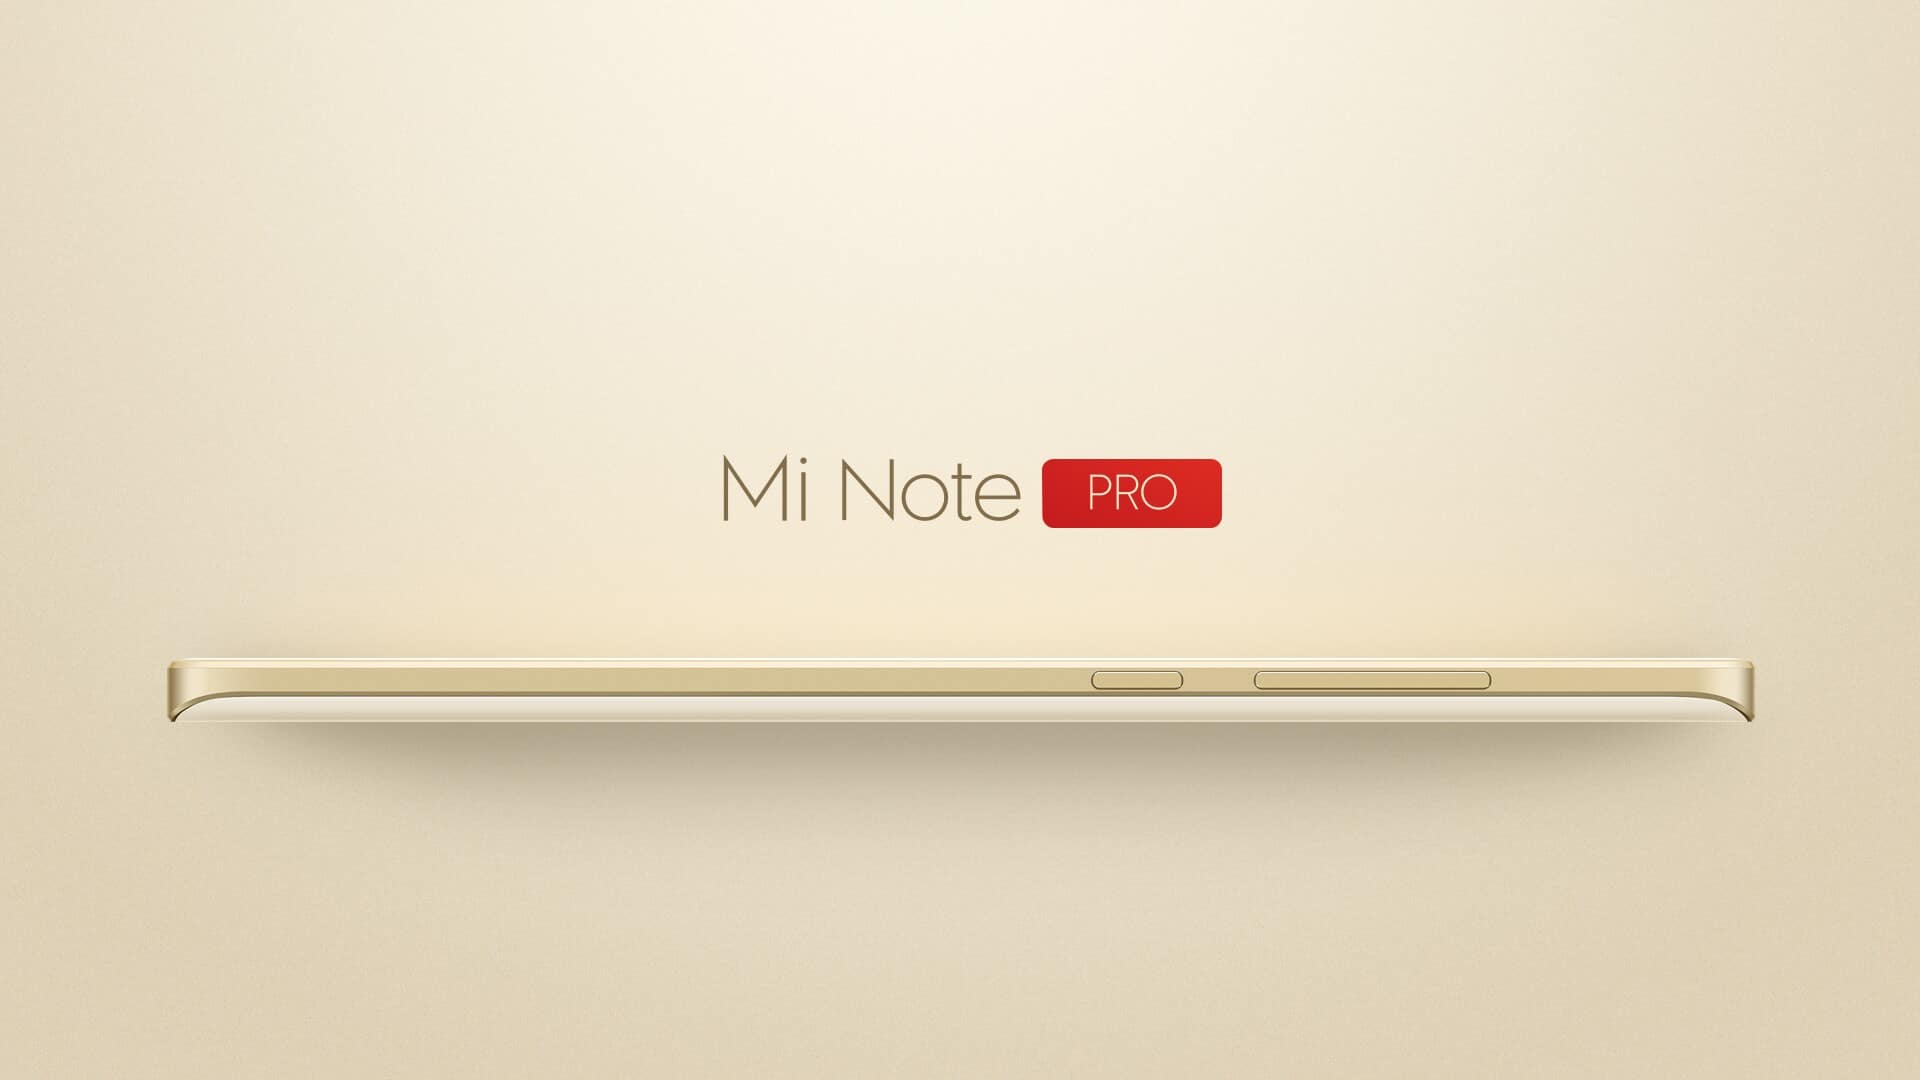 Mi Note Pro official